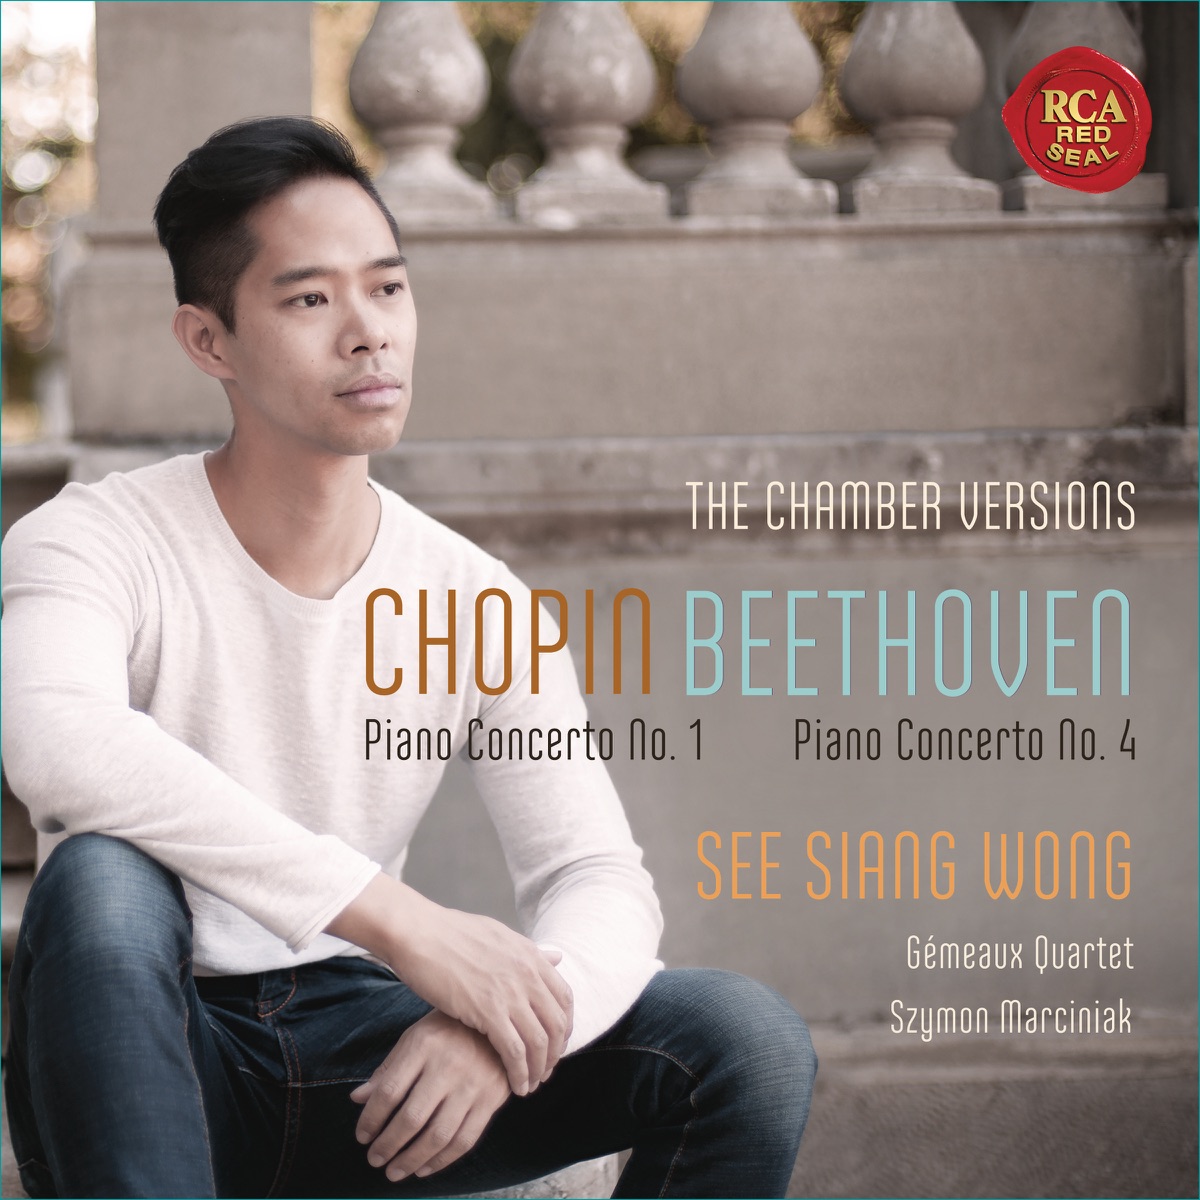 Chopin: Piano Concerto No. 1 - Beethoven: Piano Concerto No. 4 (Chamber  Music Versions) – Album par See Siang Wong & Gemeaux Quartett – Apple Music